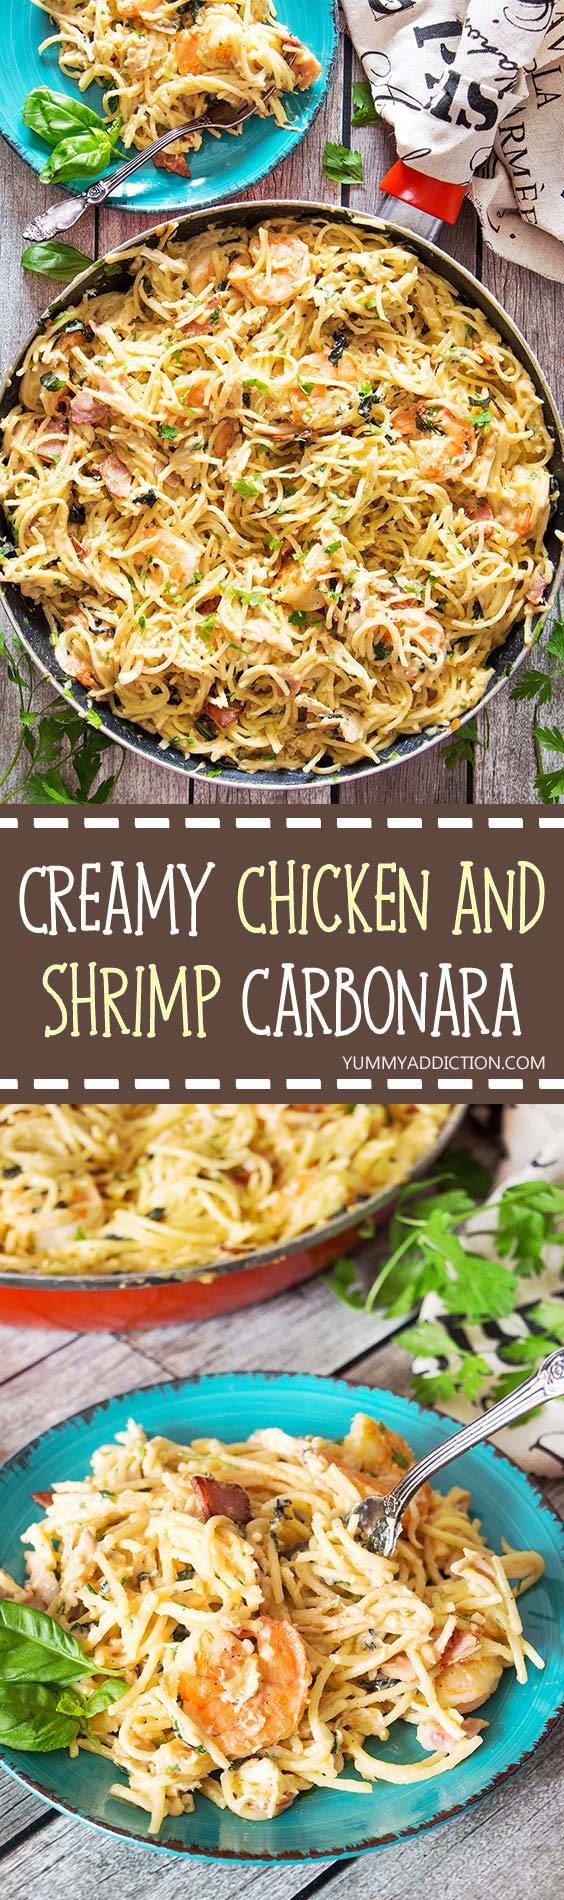 This Chicken and Shrimp Carbonara is an example of a perfect pasta dish. Creamy, rich, comforting, and super delicious, it is guaranteed to become a hit in your house! | yummyaddiction.com